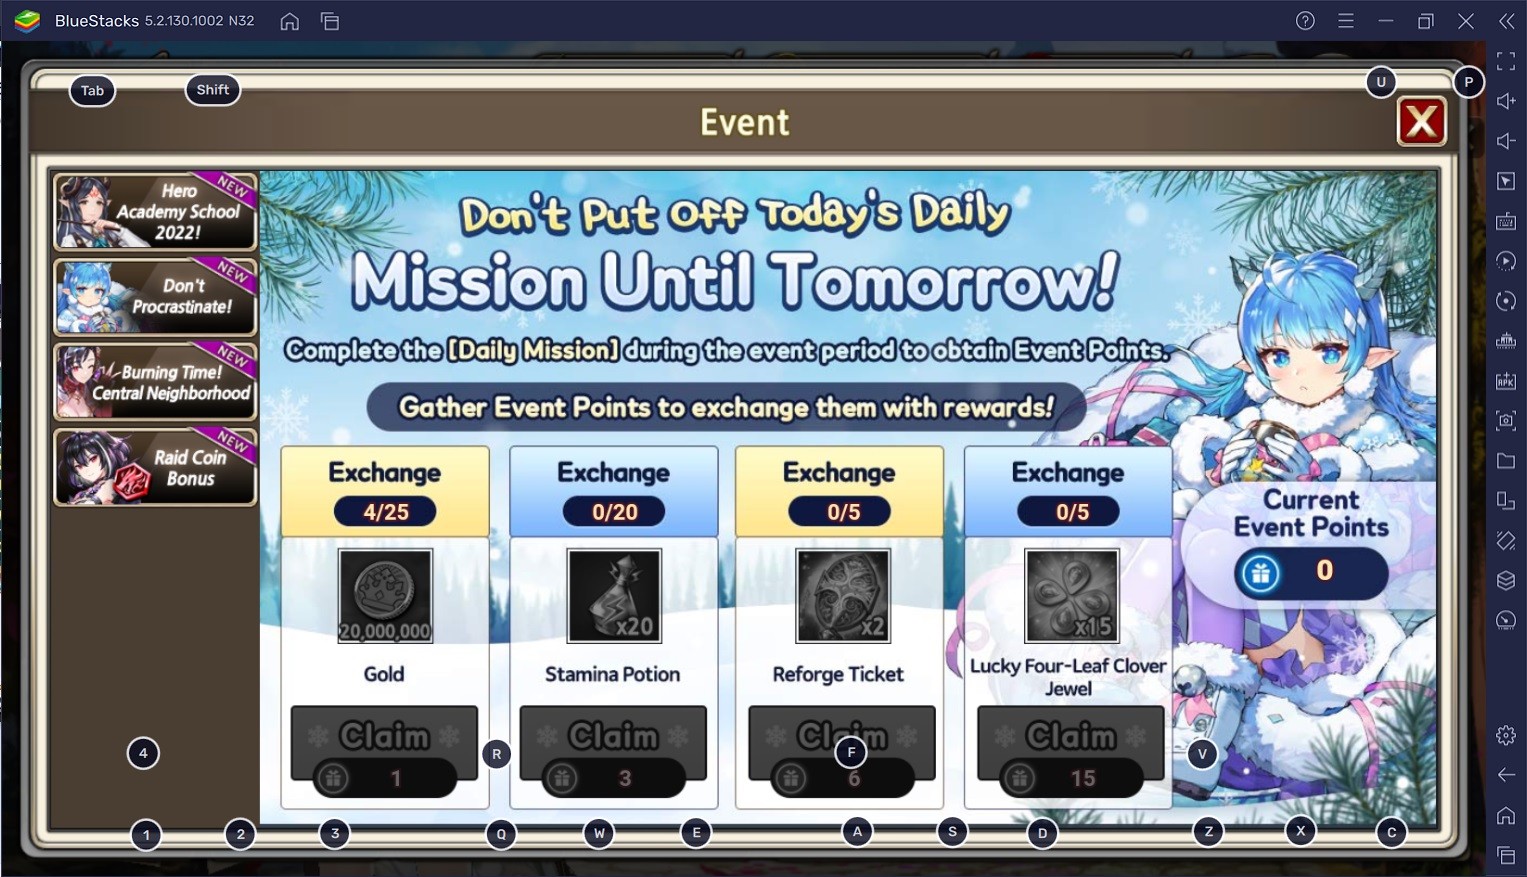 KING’s RAID: Hero Academy School Log In Event and More